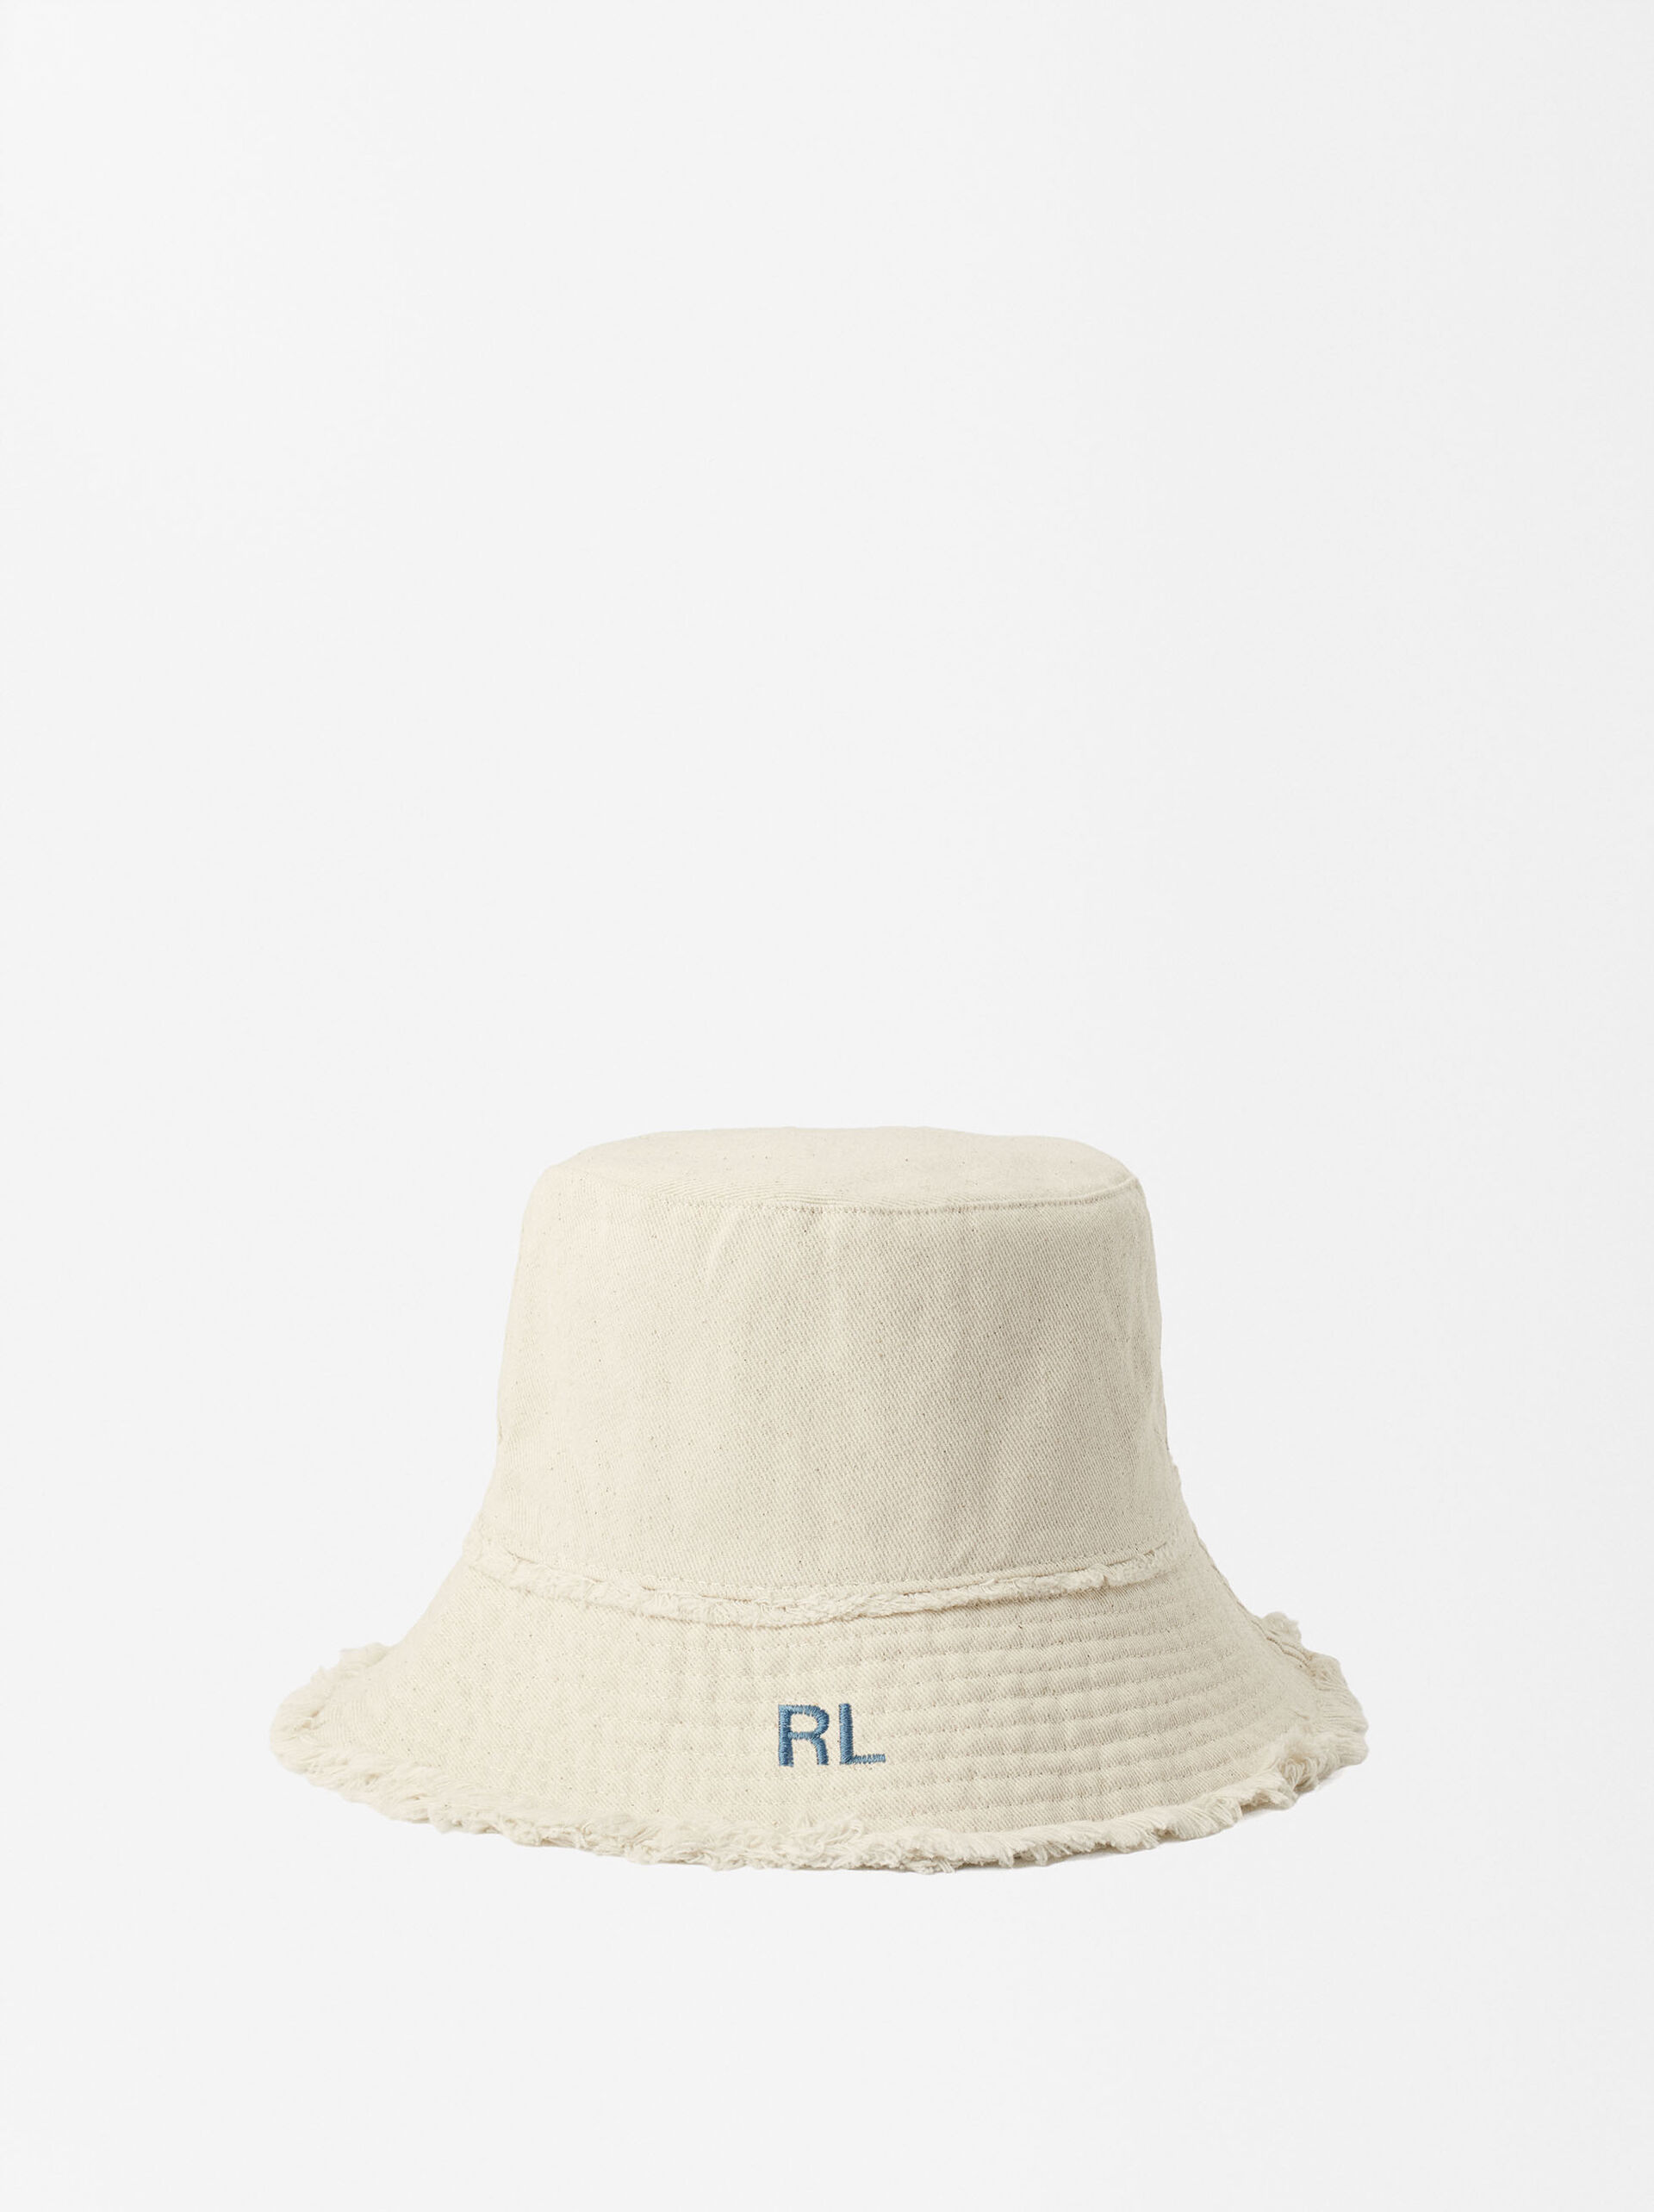 Personalized Bucket Hat image number 0.0